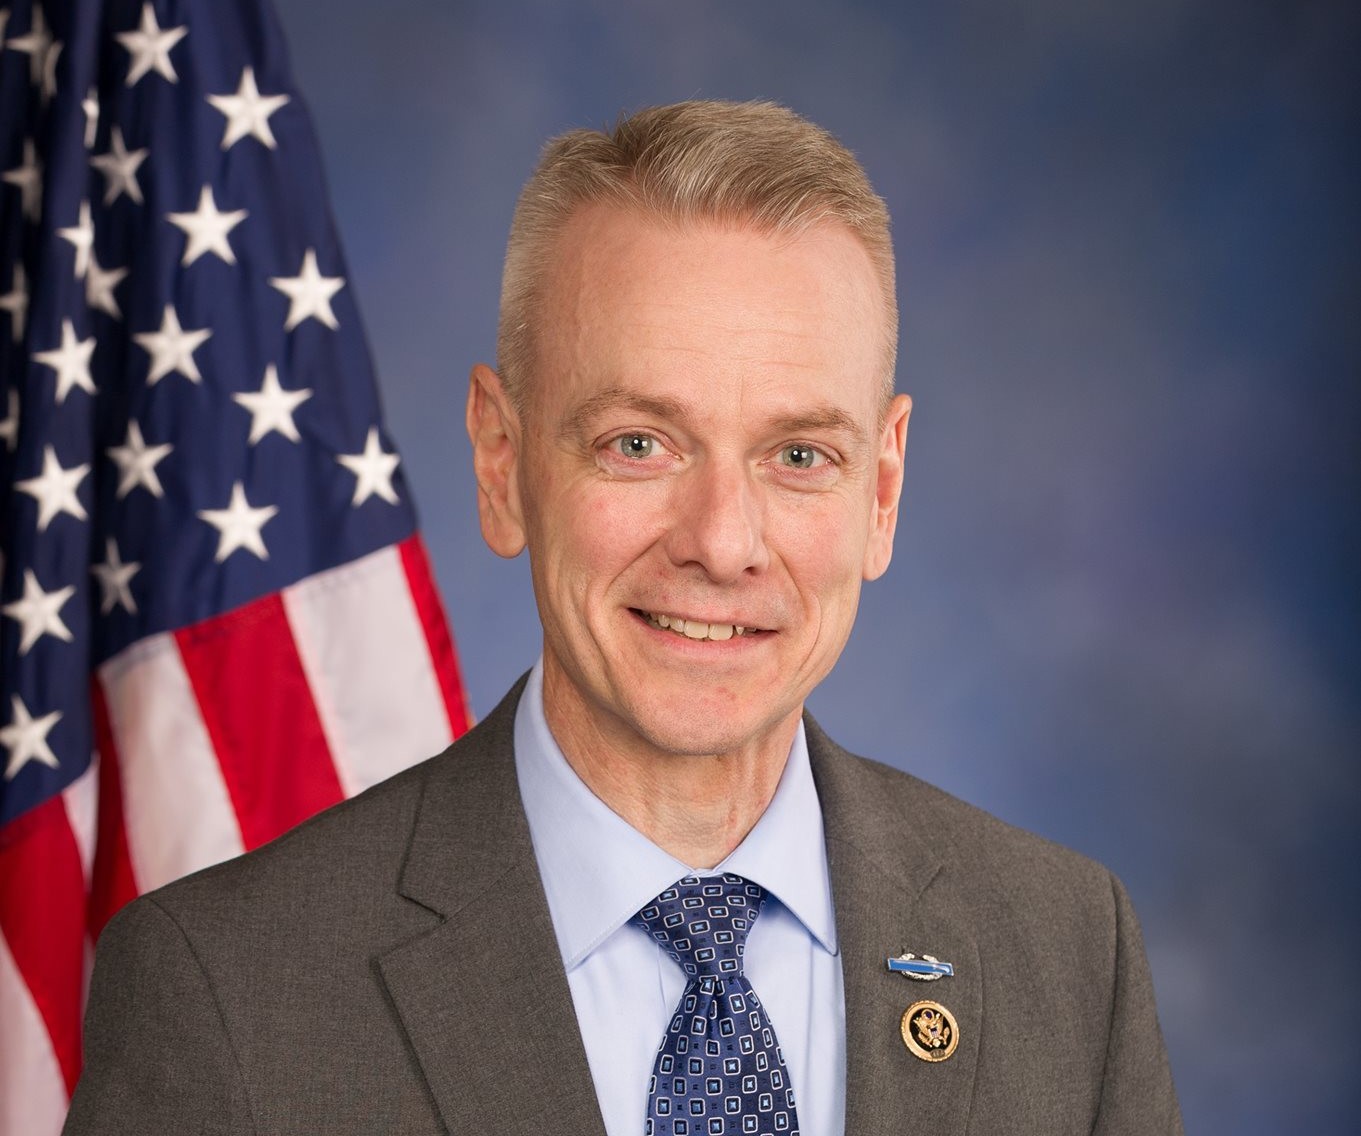 Representative Steve Russell to speak at Commencement